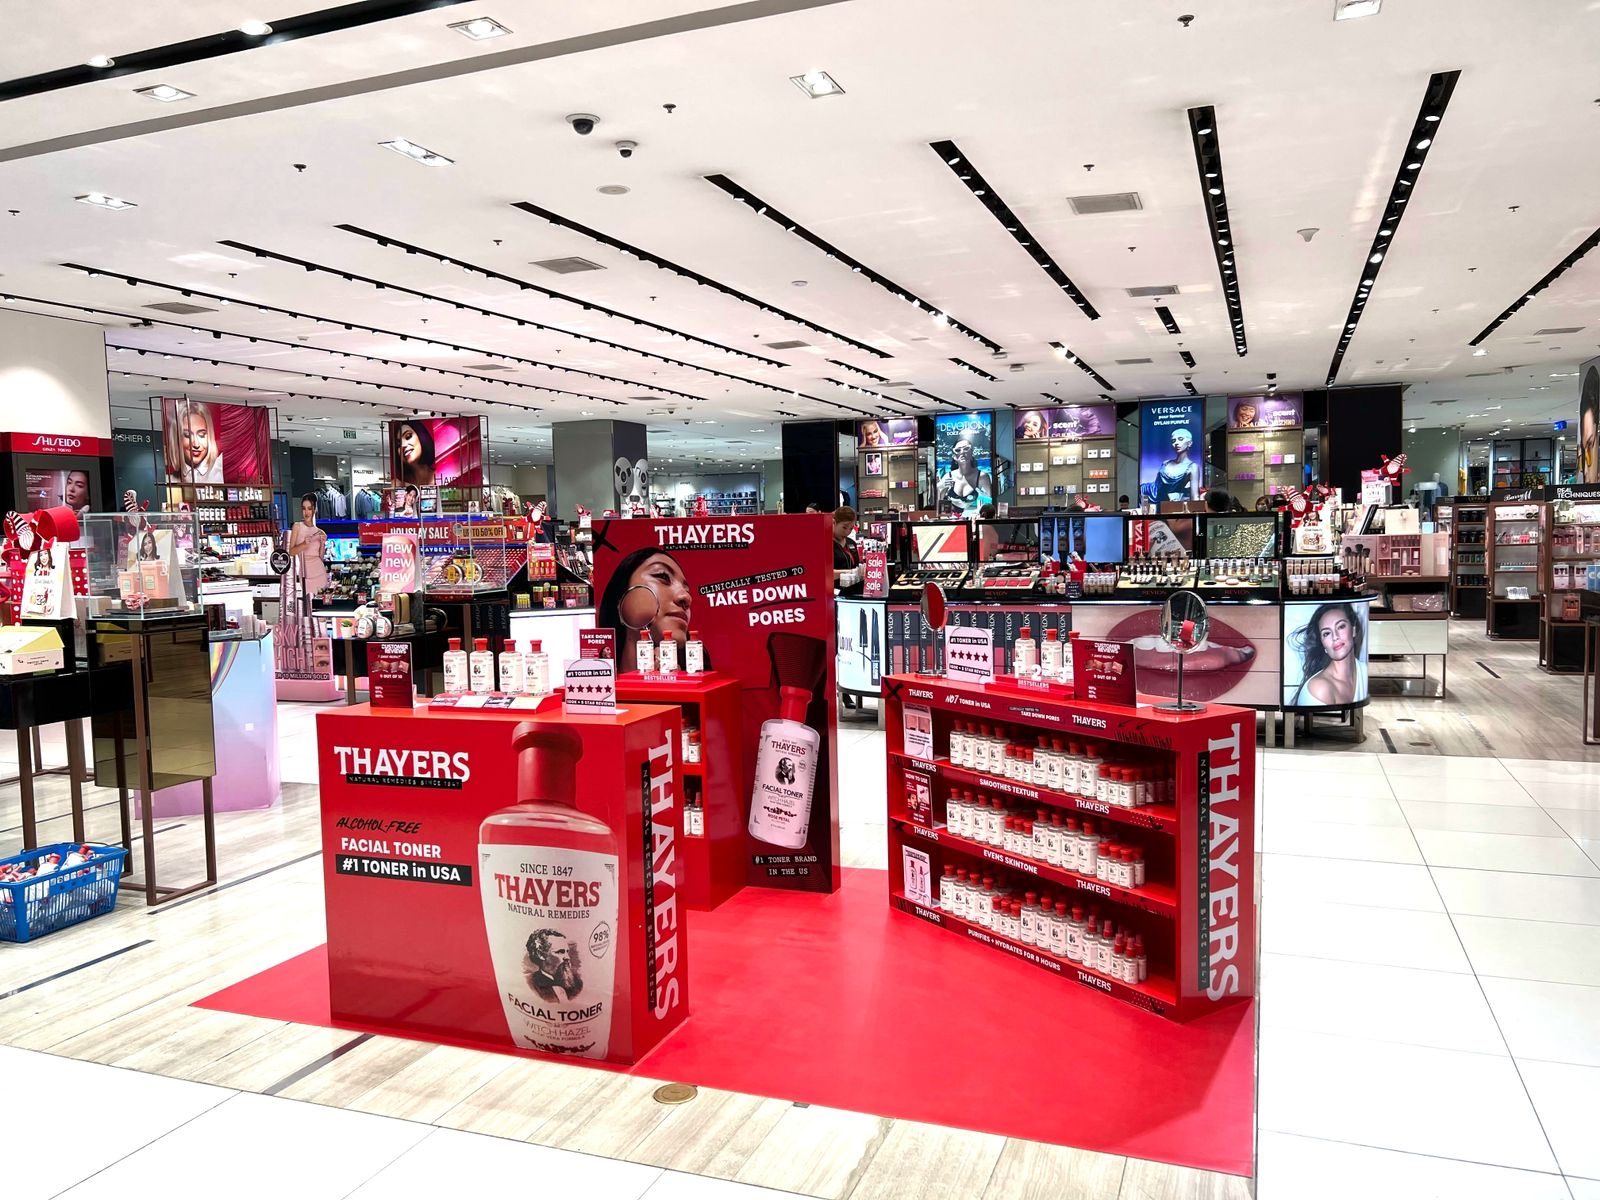 LOOK: What to expect from Thayers’ pop-up store in Metro Manila